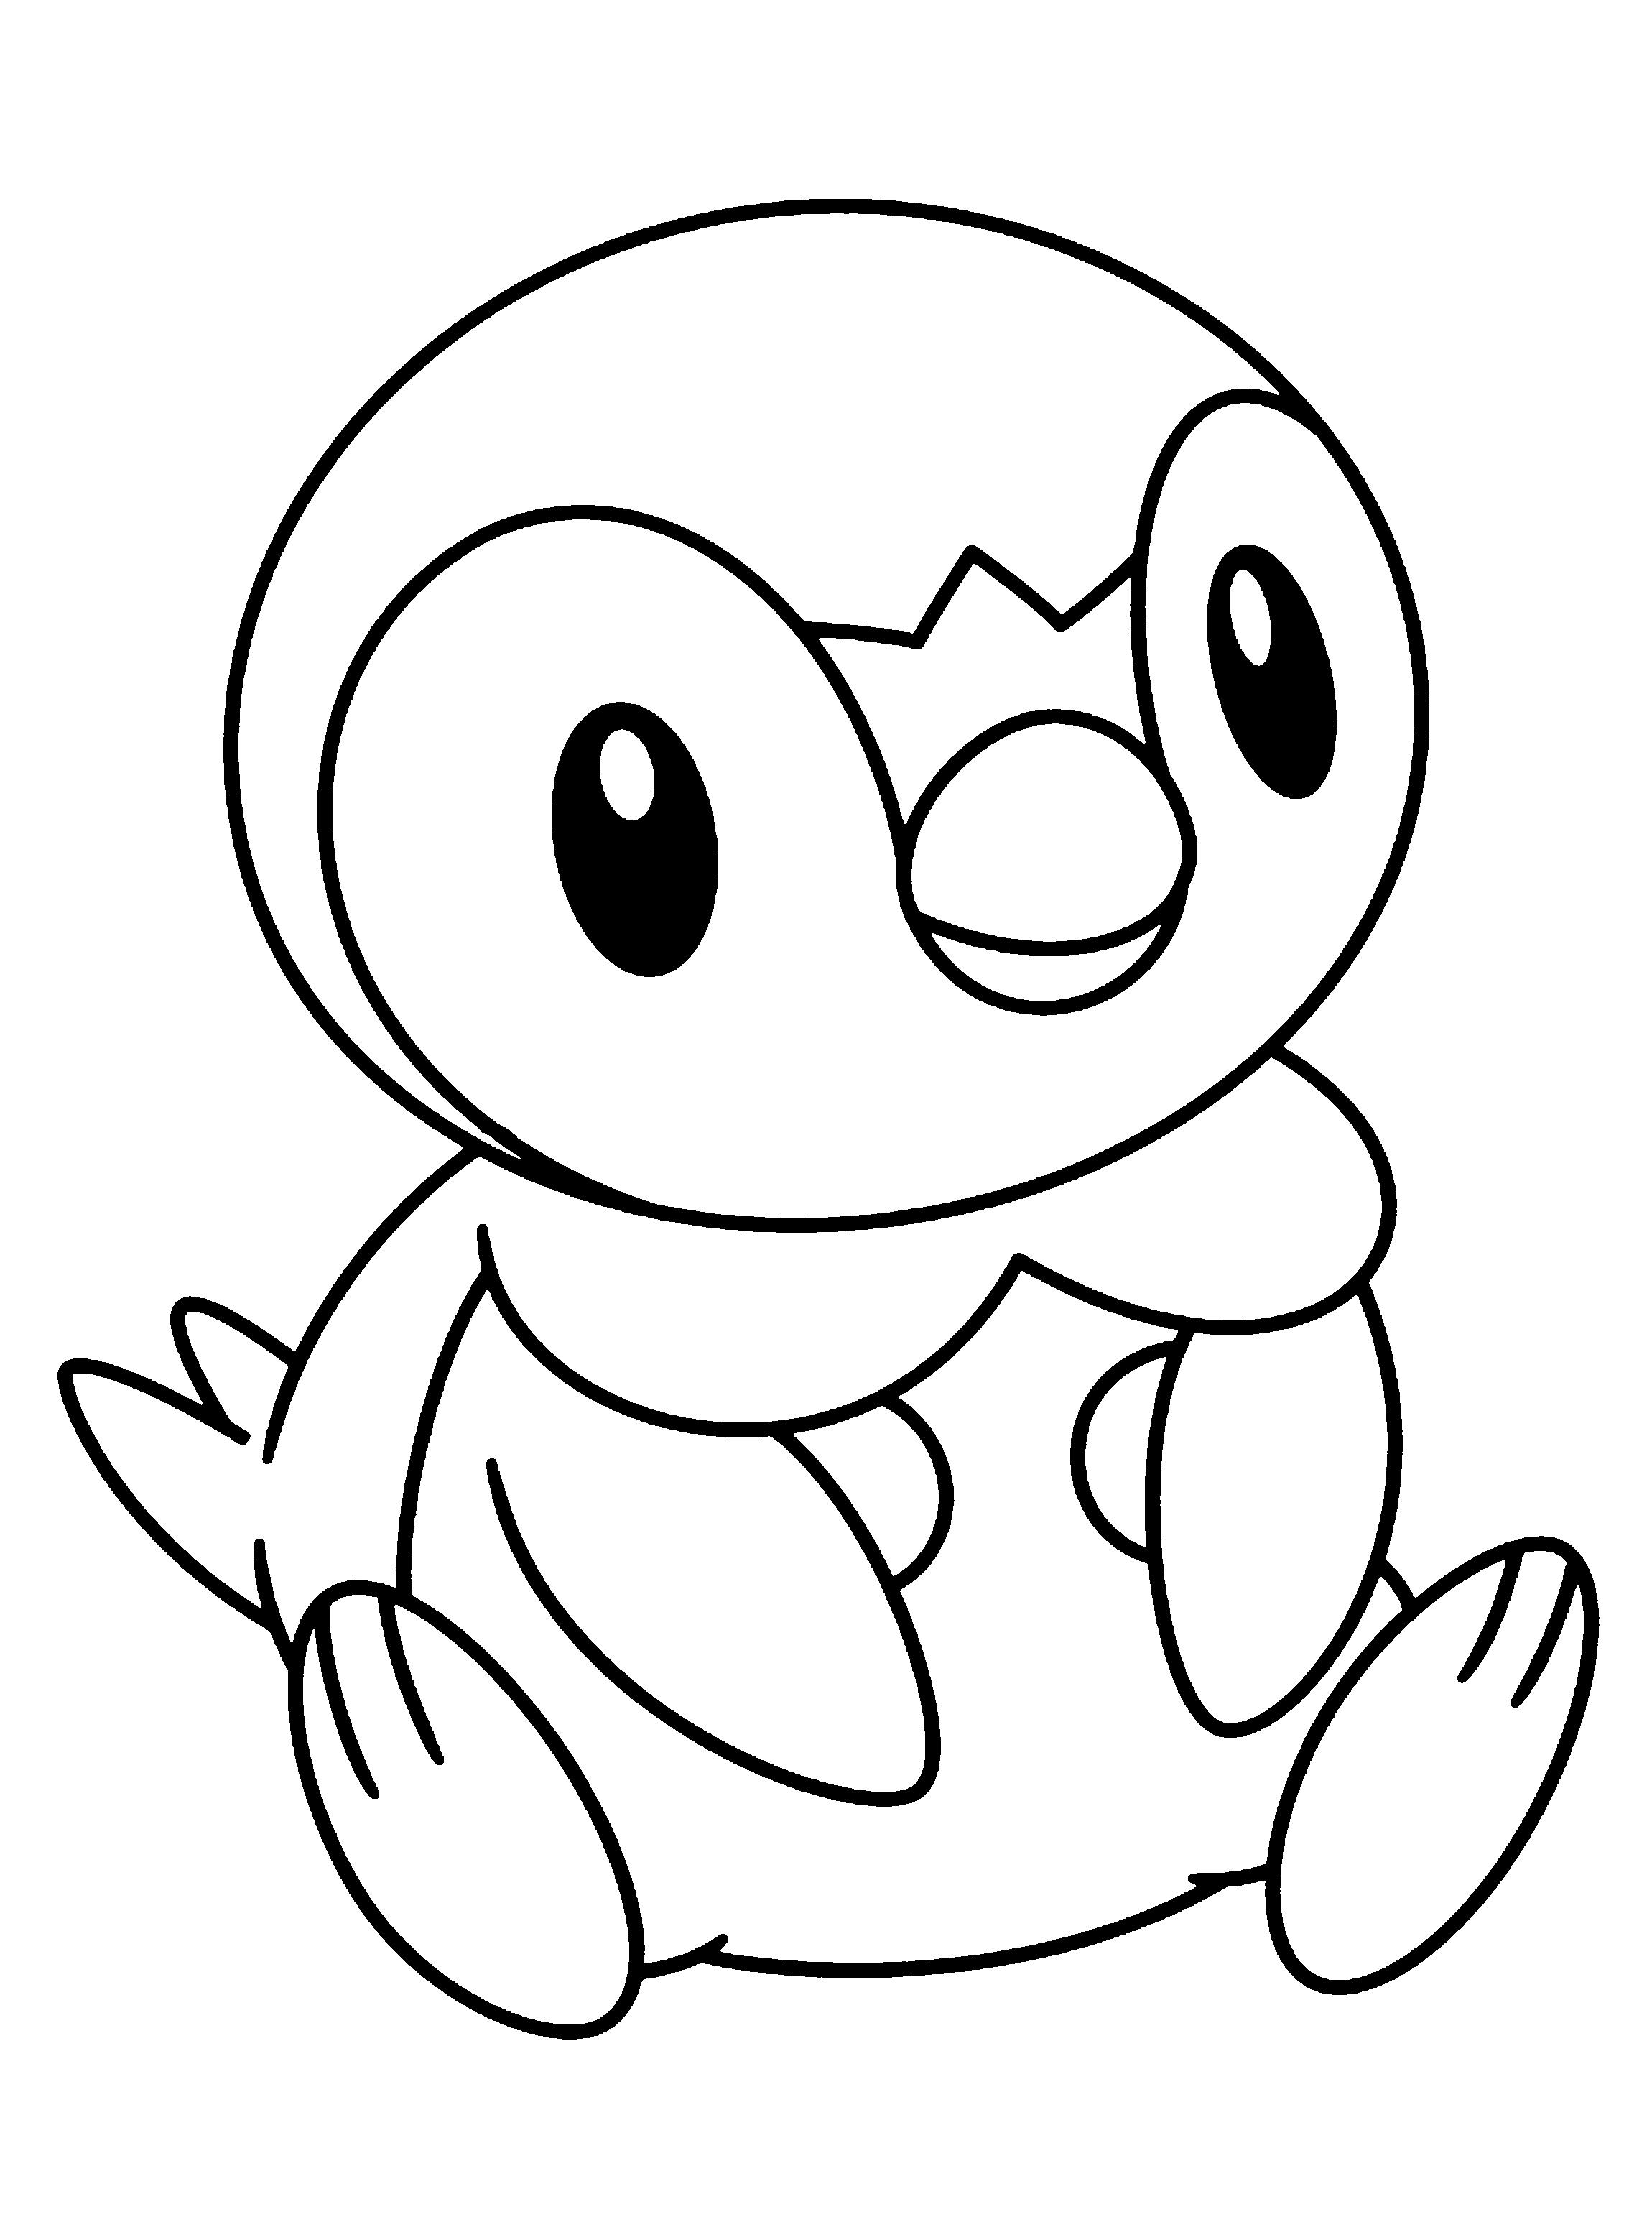 coloring pages pokemon piplup - photo #12